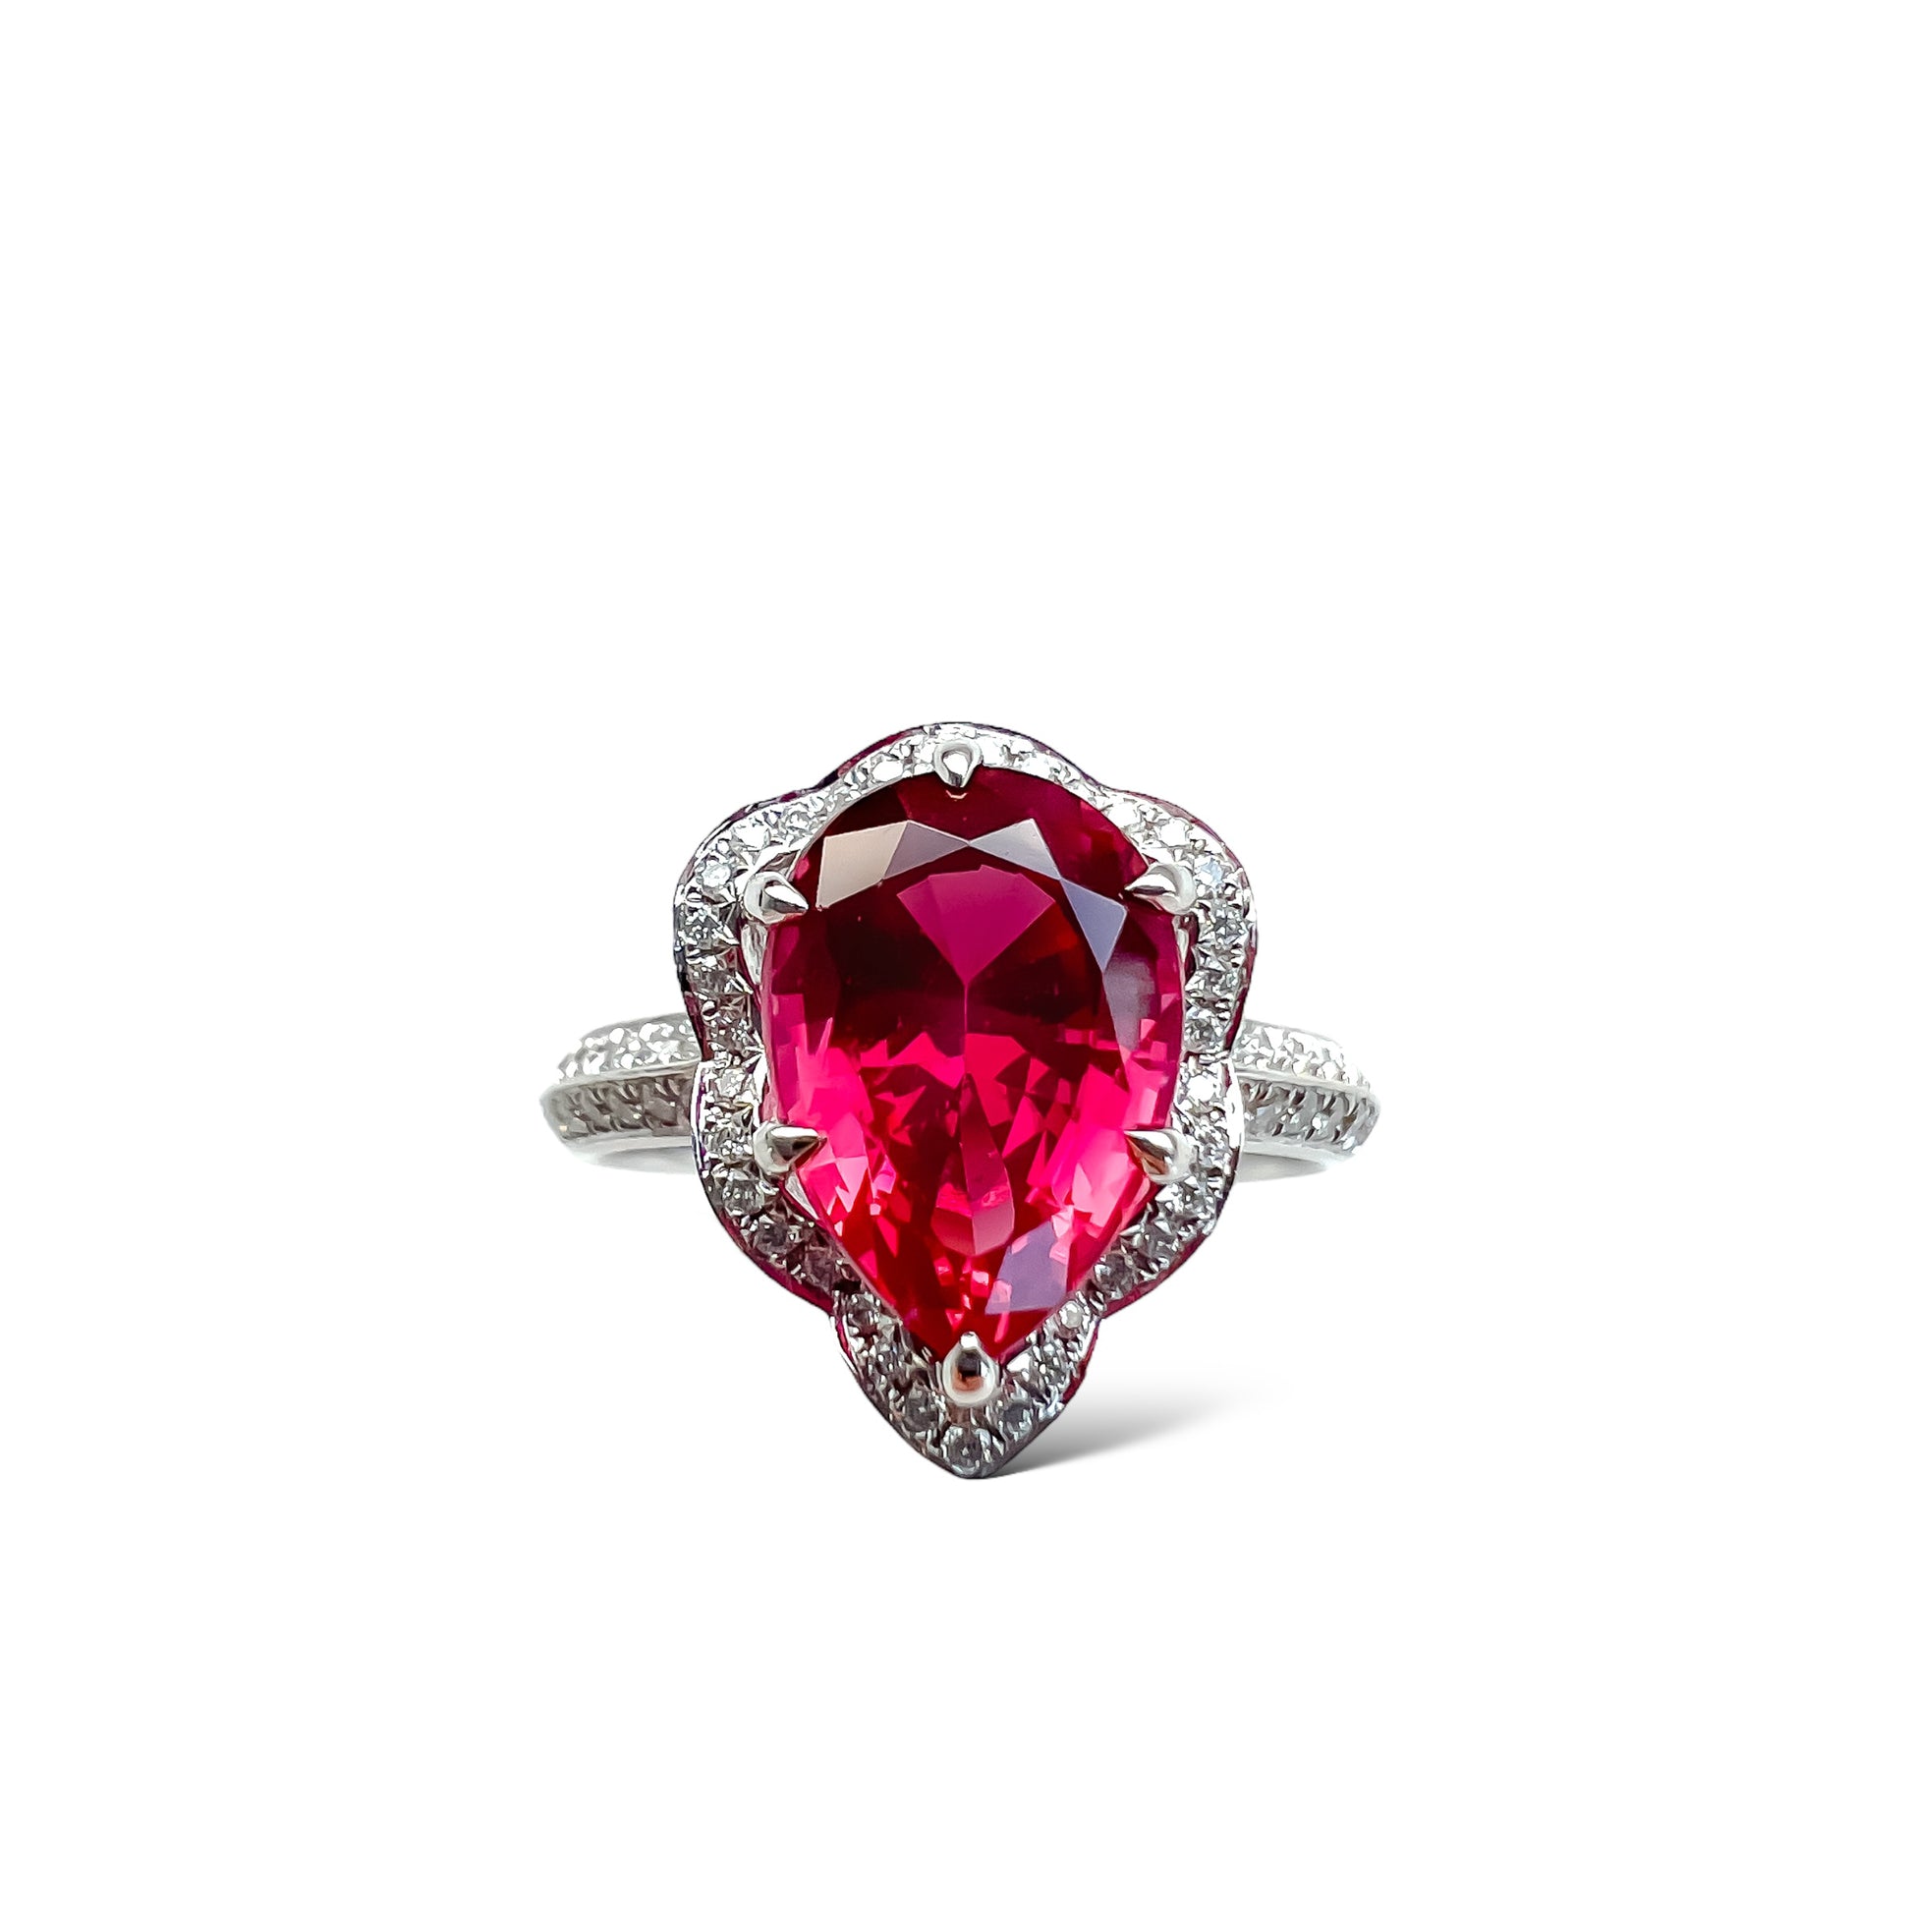 GIA Certified Red Spinel and diamond ring Hong Kong. 红色尖晶石和钻石戒指 香港